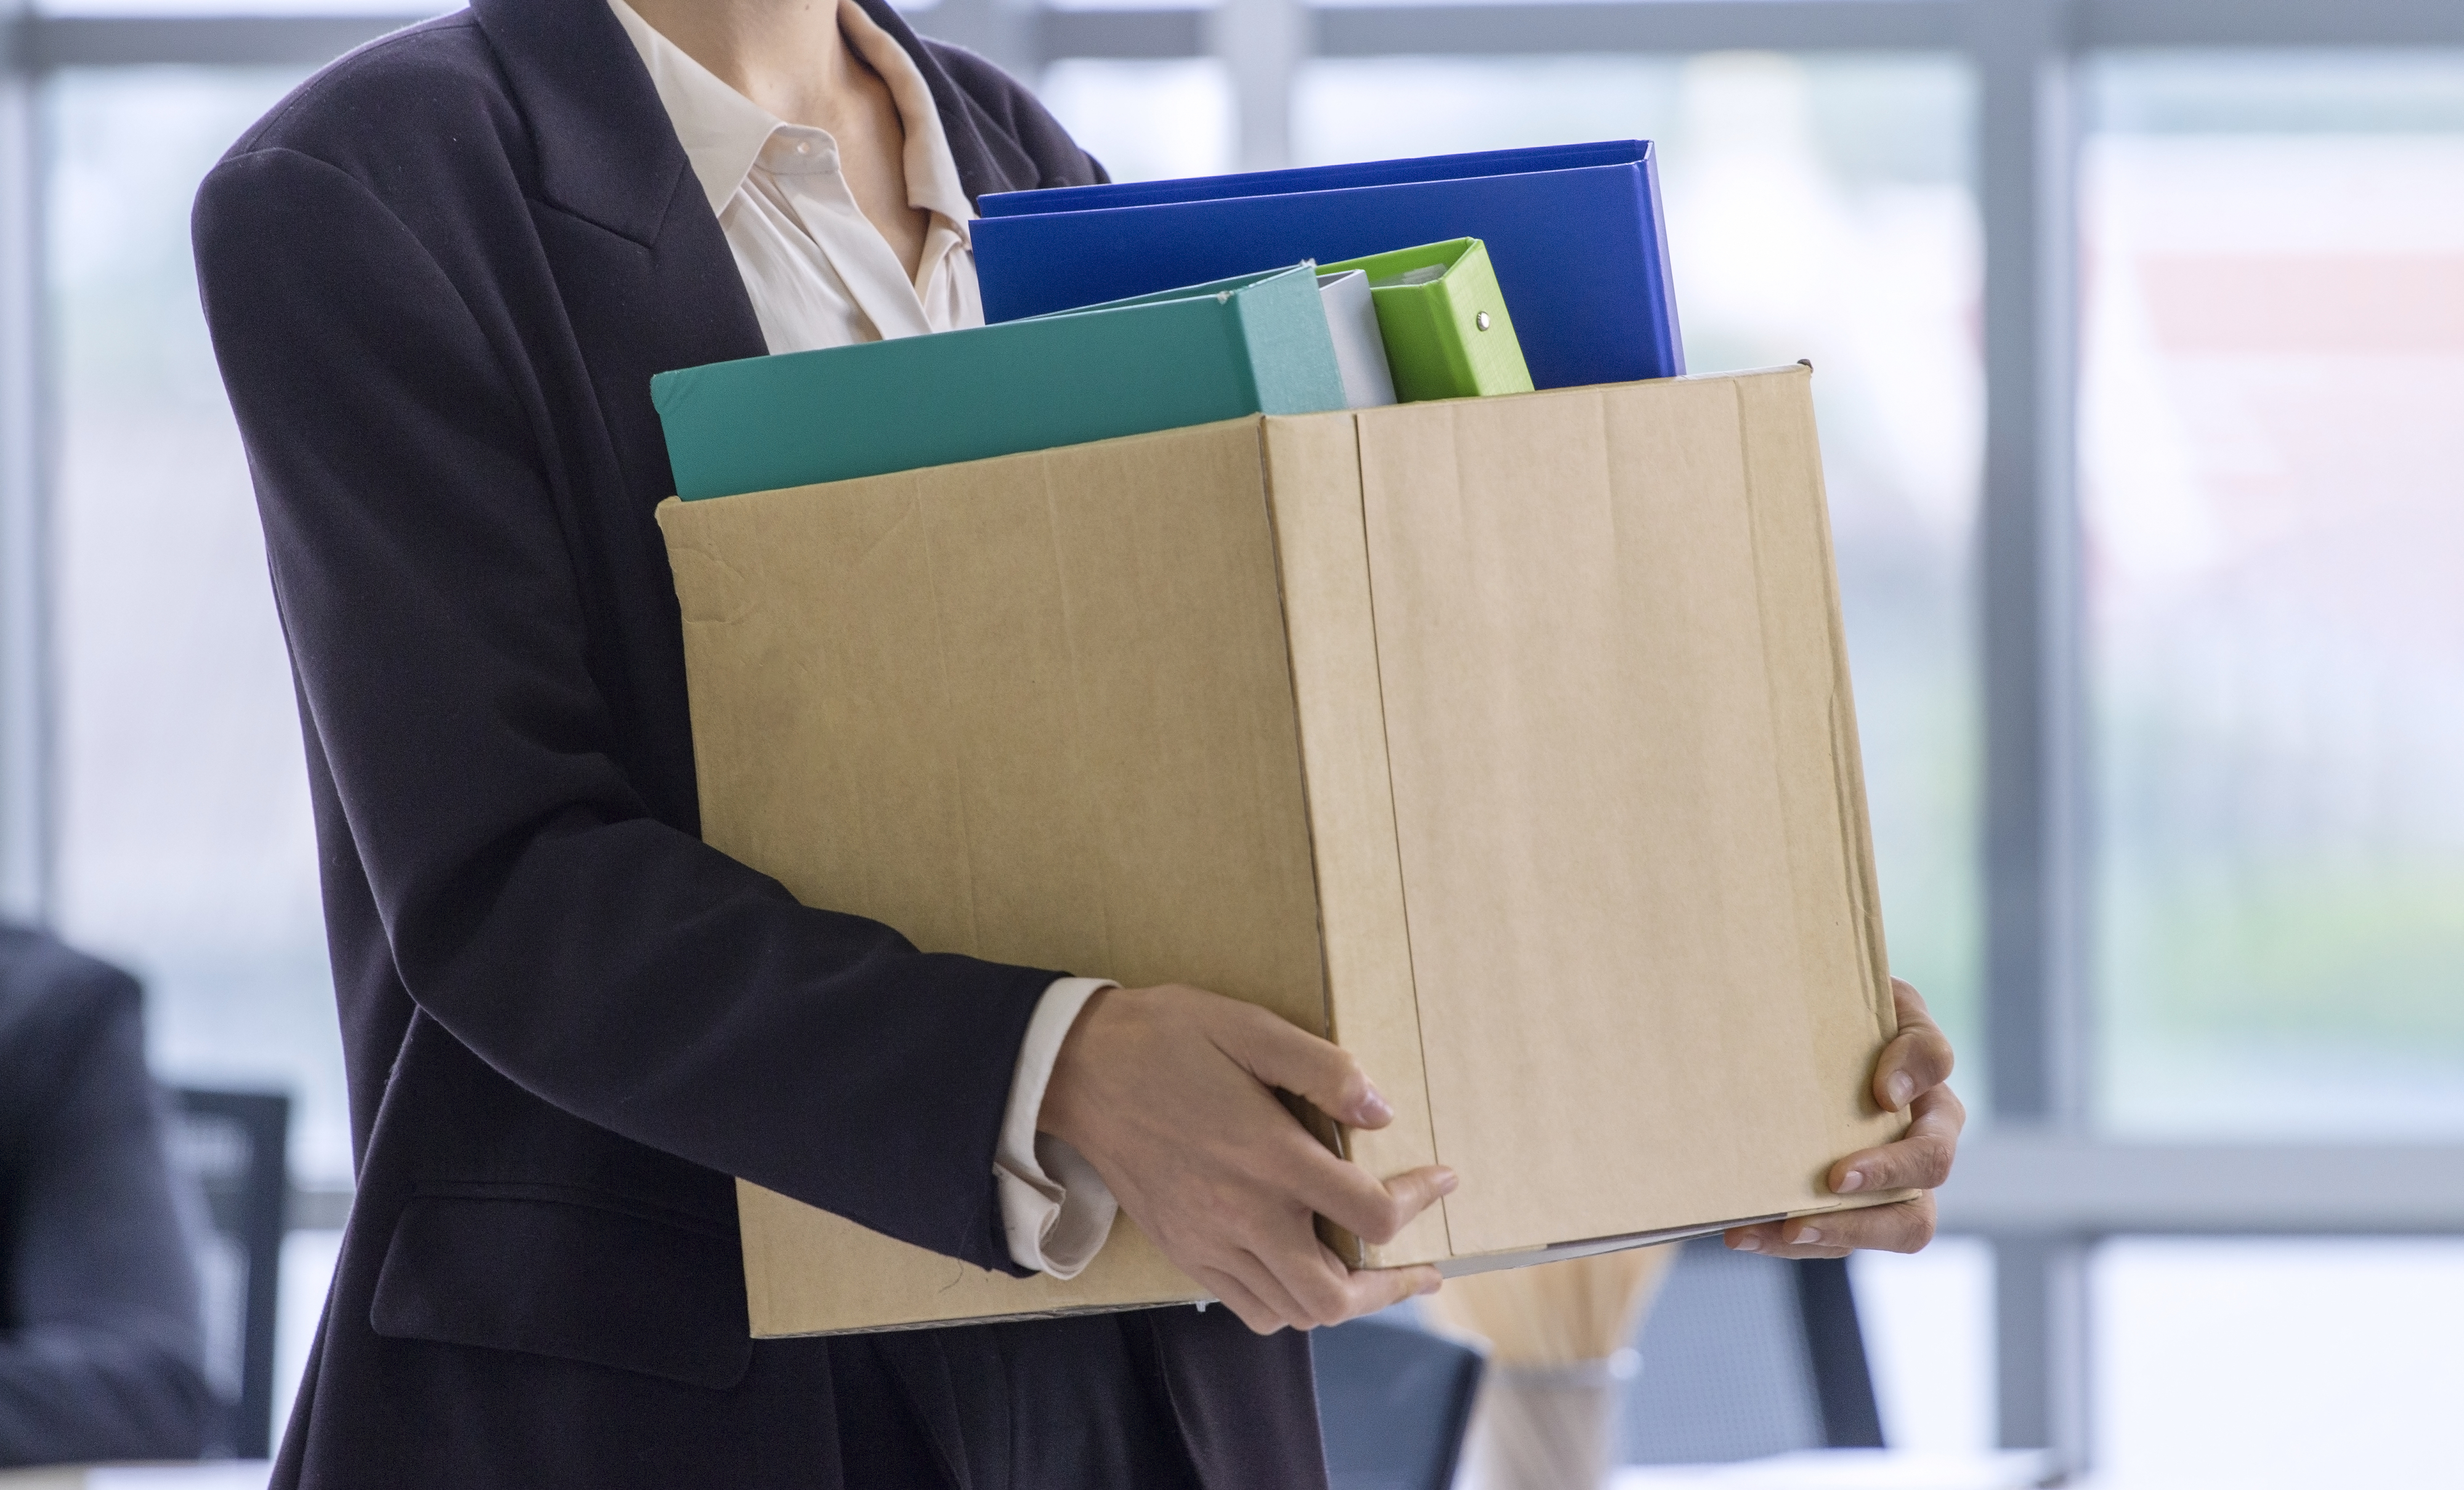 Person in a suit holding a box of work items, possibly after a job termination or relocation